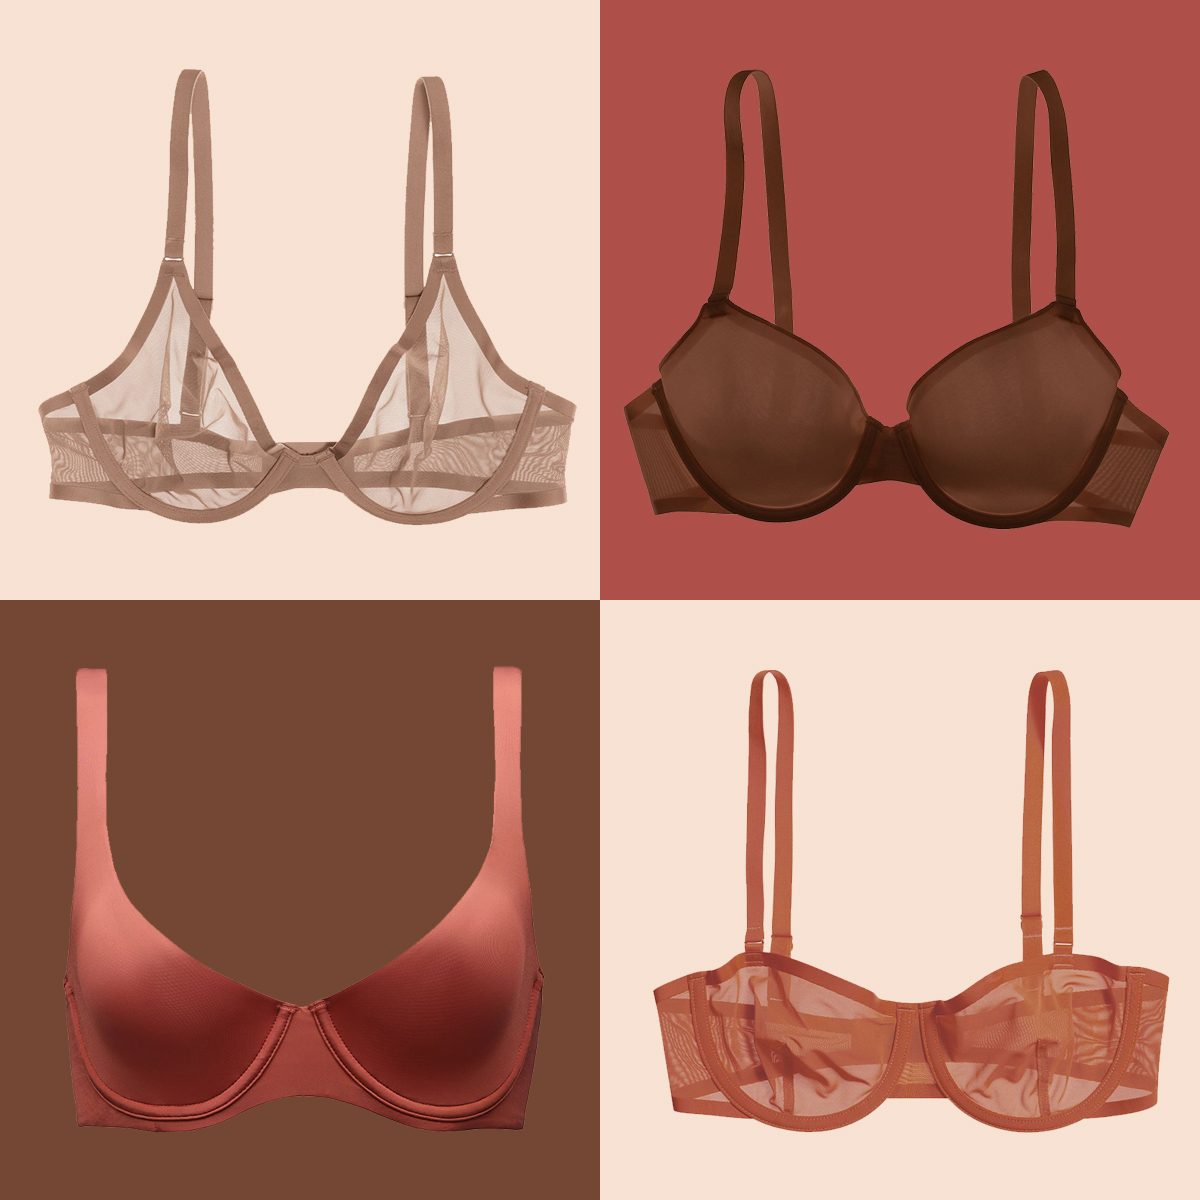 Cuup Virtual Bra Fitting: Here's What I Thought